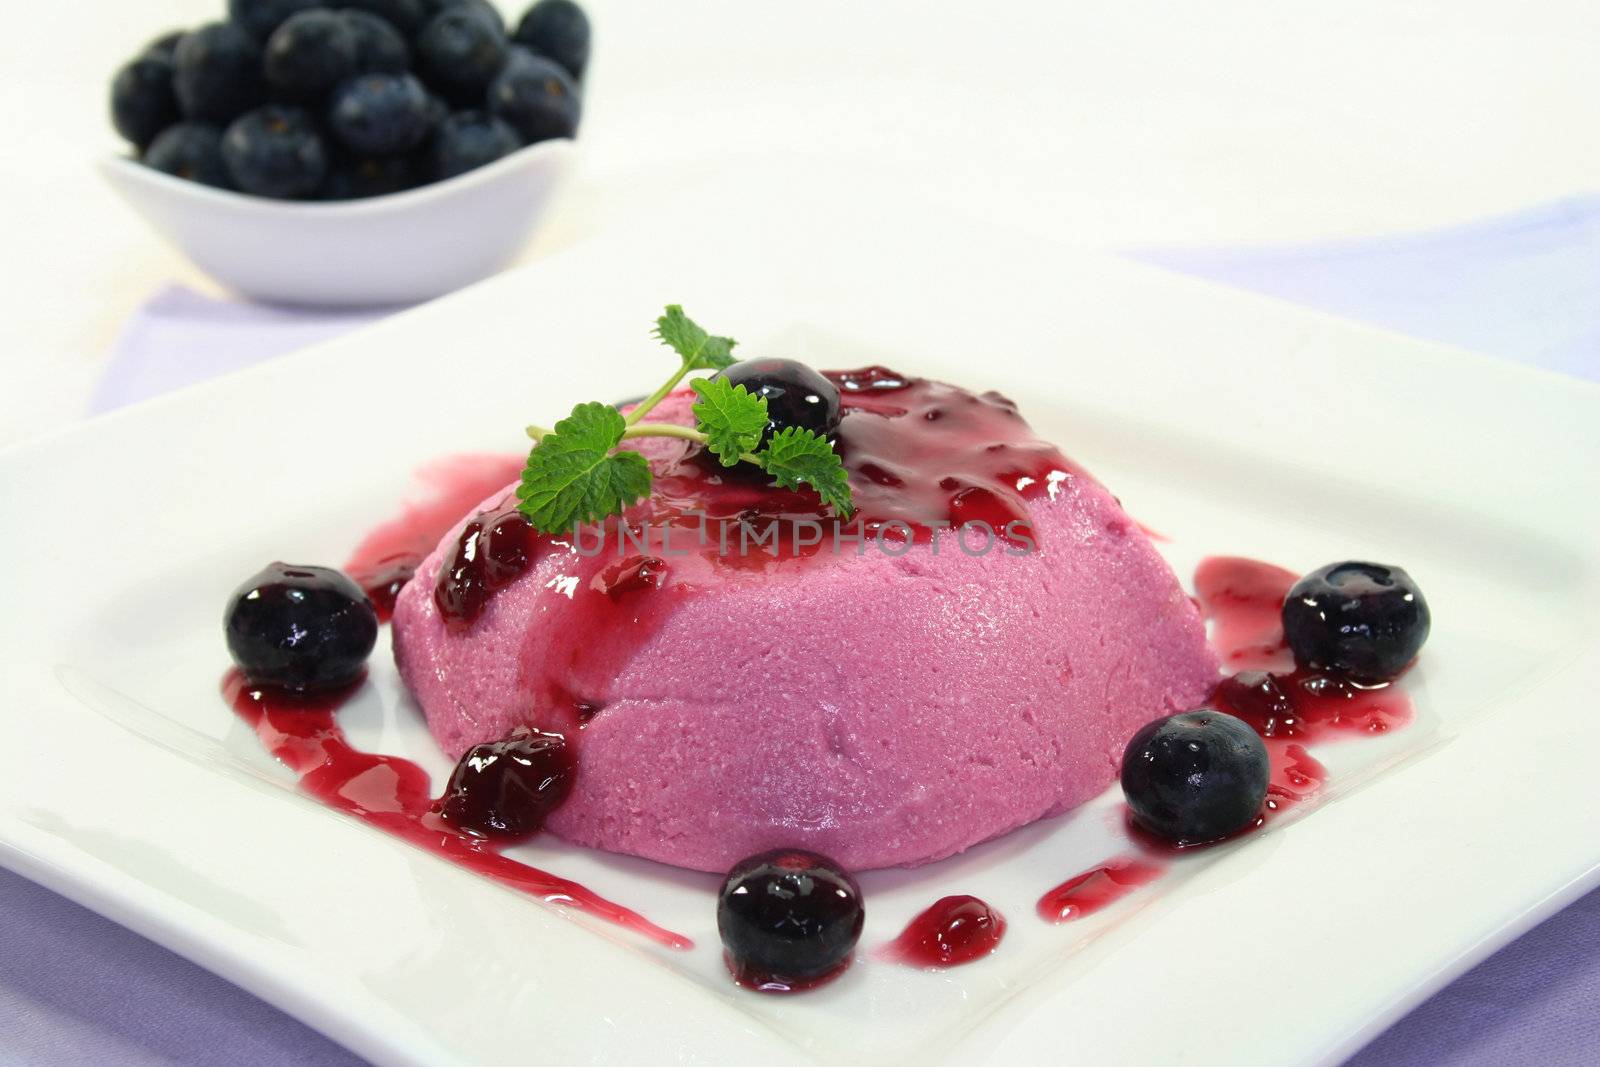 Blueberry dessert on a white plate